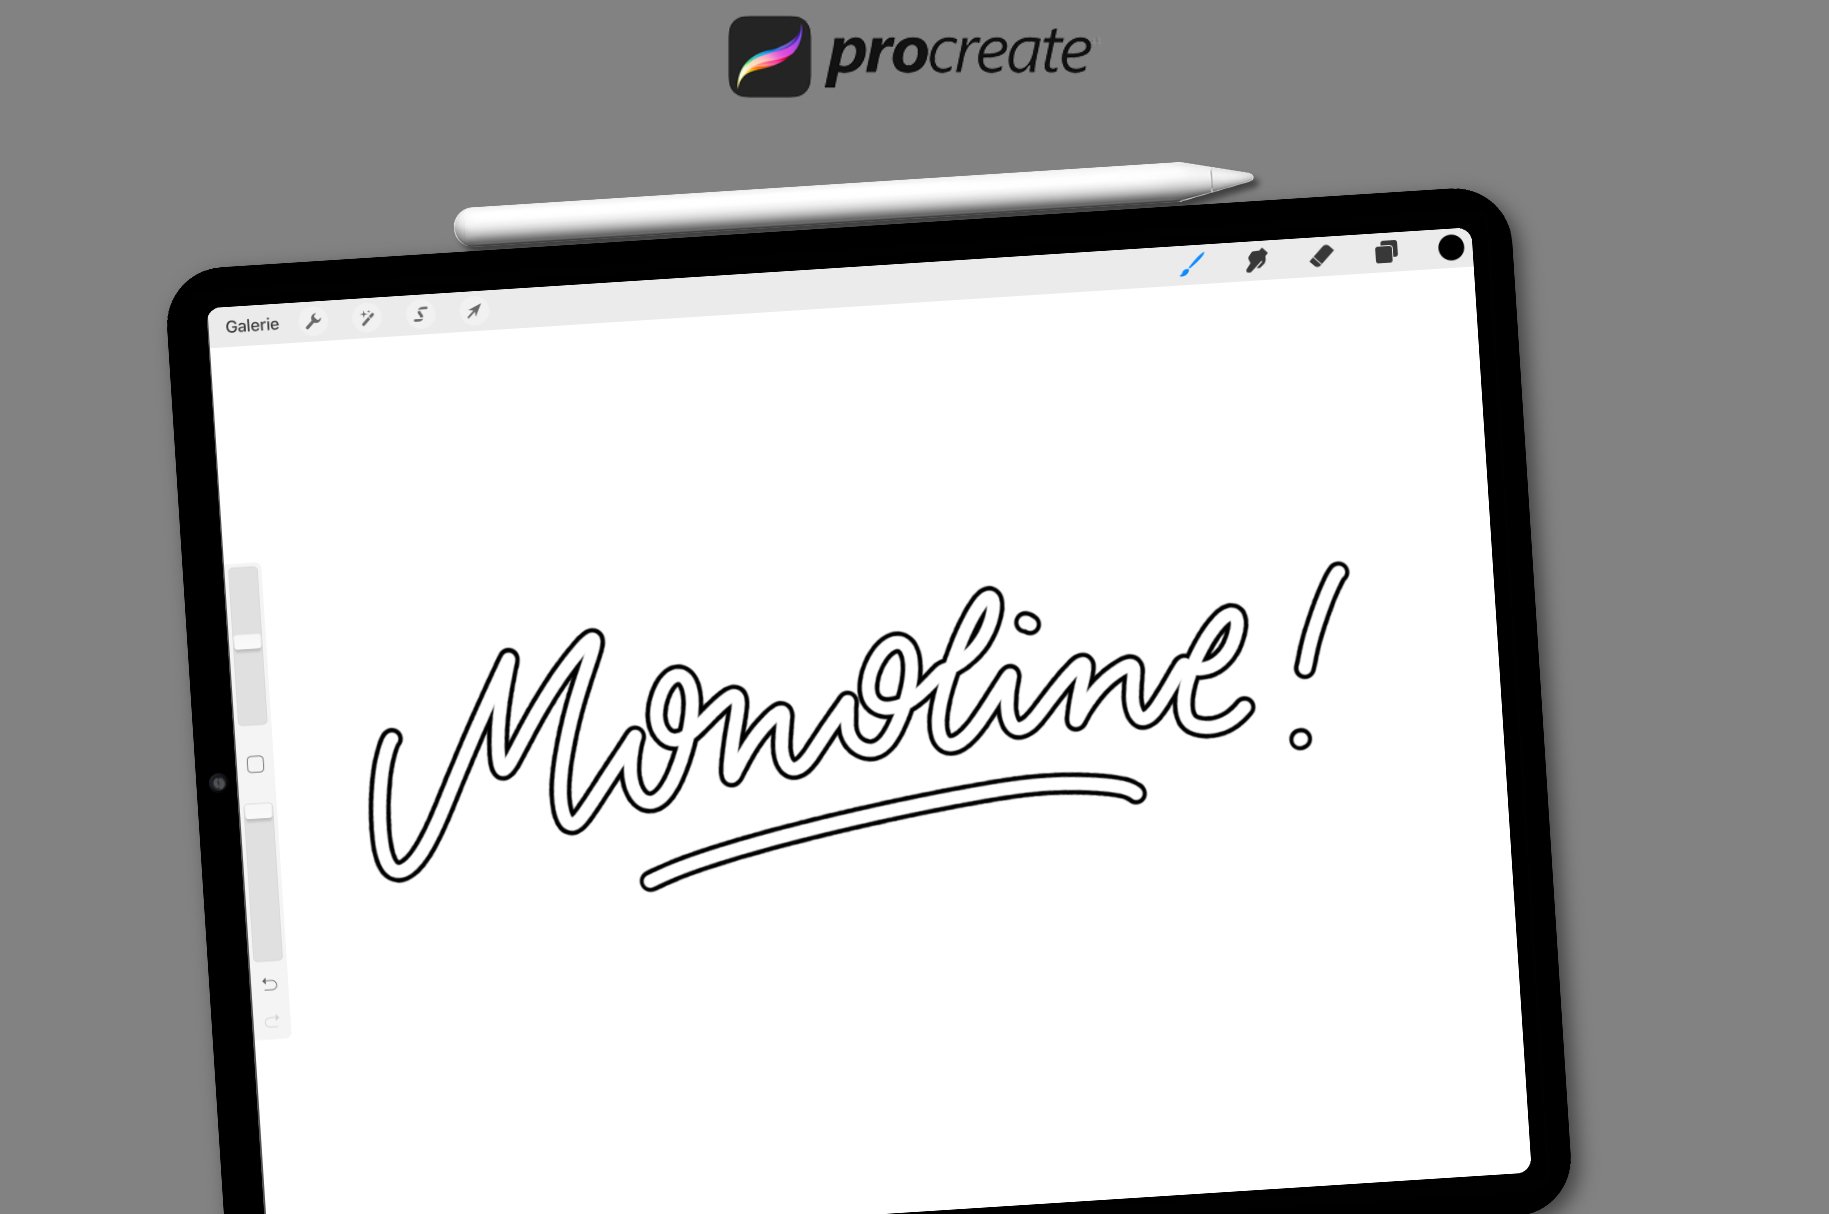 The Outline and Shadow Studio for Procreate